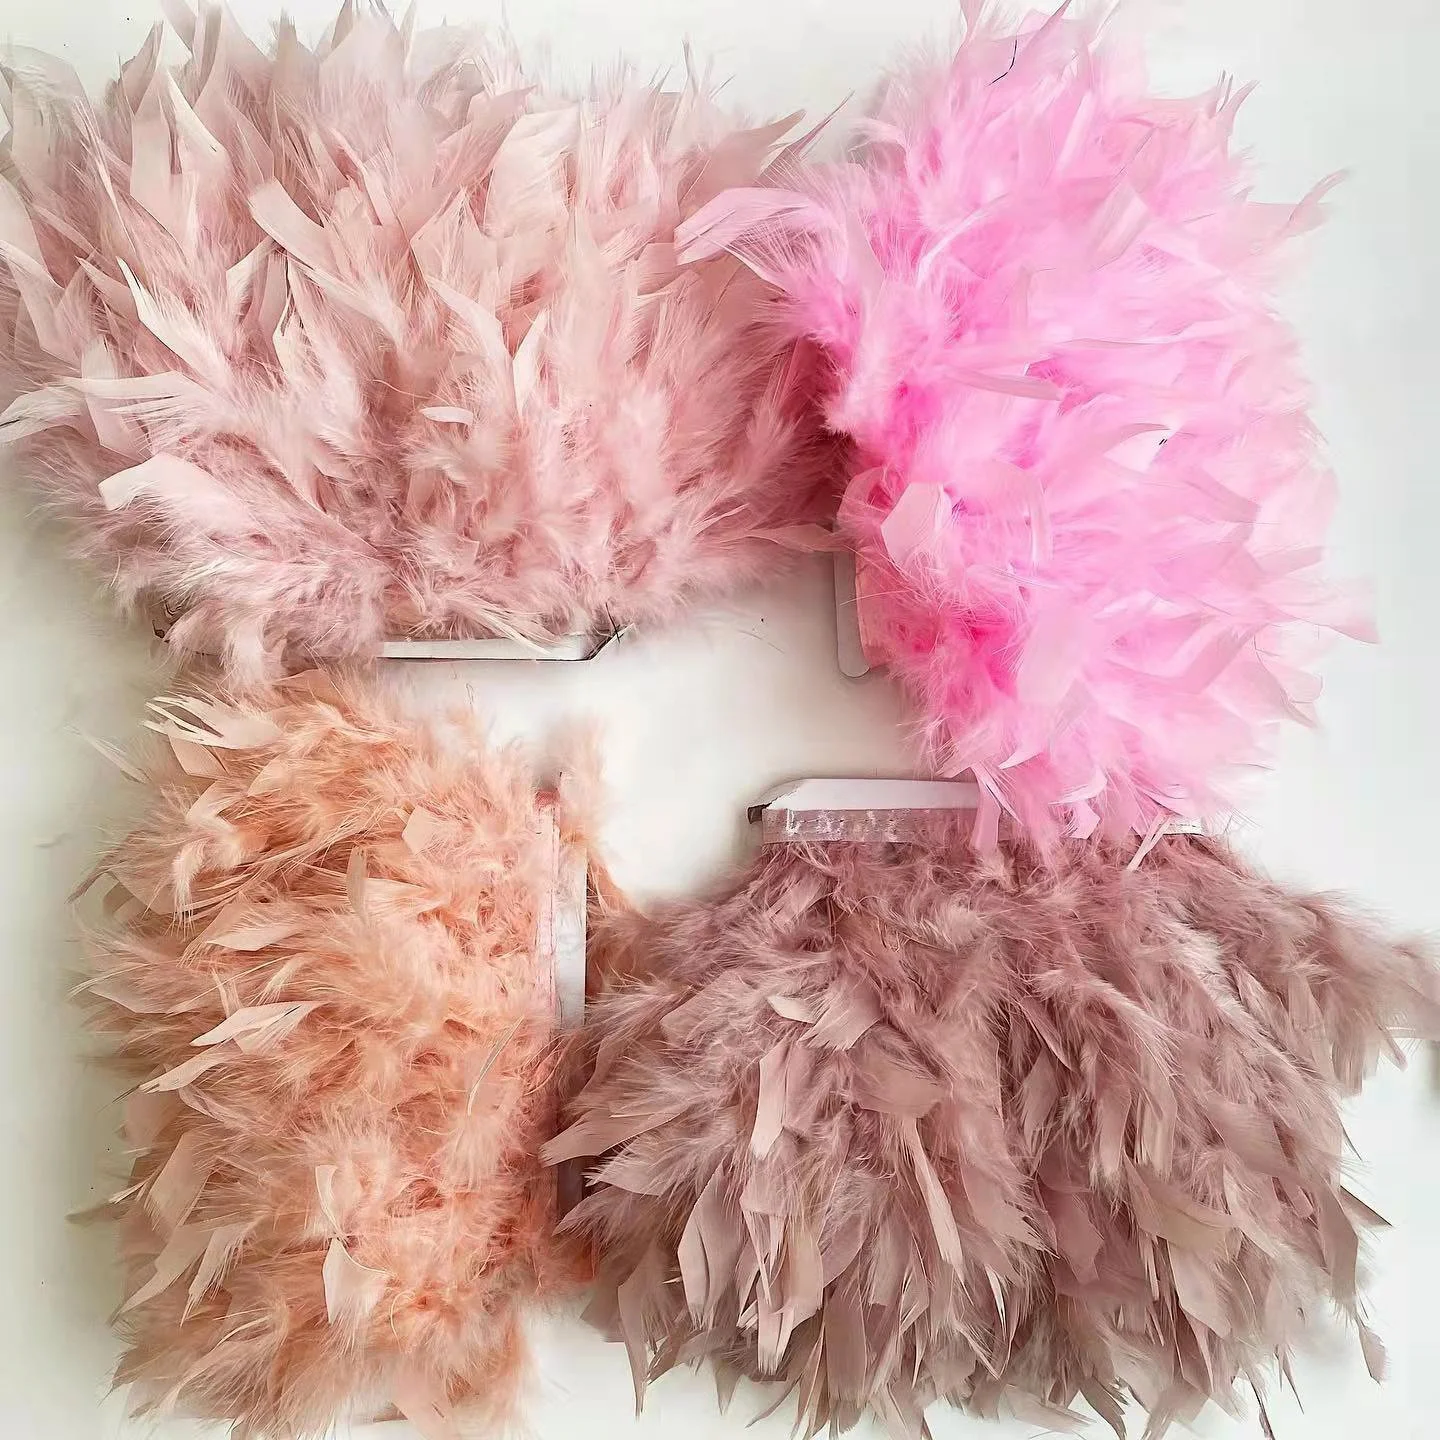 Red Ostrich Feathers Trim Sewing Fringe 2Yard 4-6inch For DIY Dress Sewing  Craft Clothing Latin Wedding Dress Decoration Ostrich Feather Trim